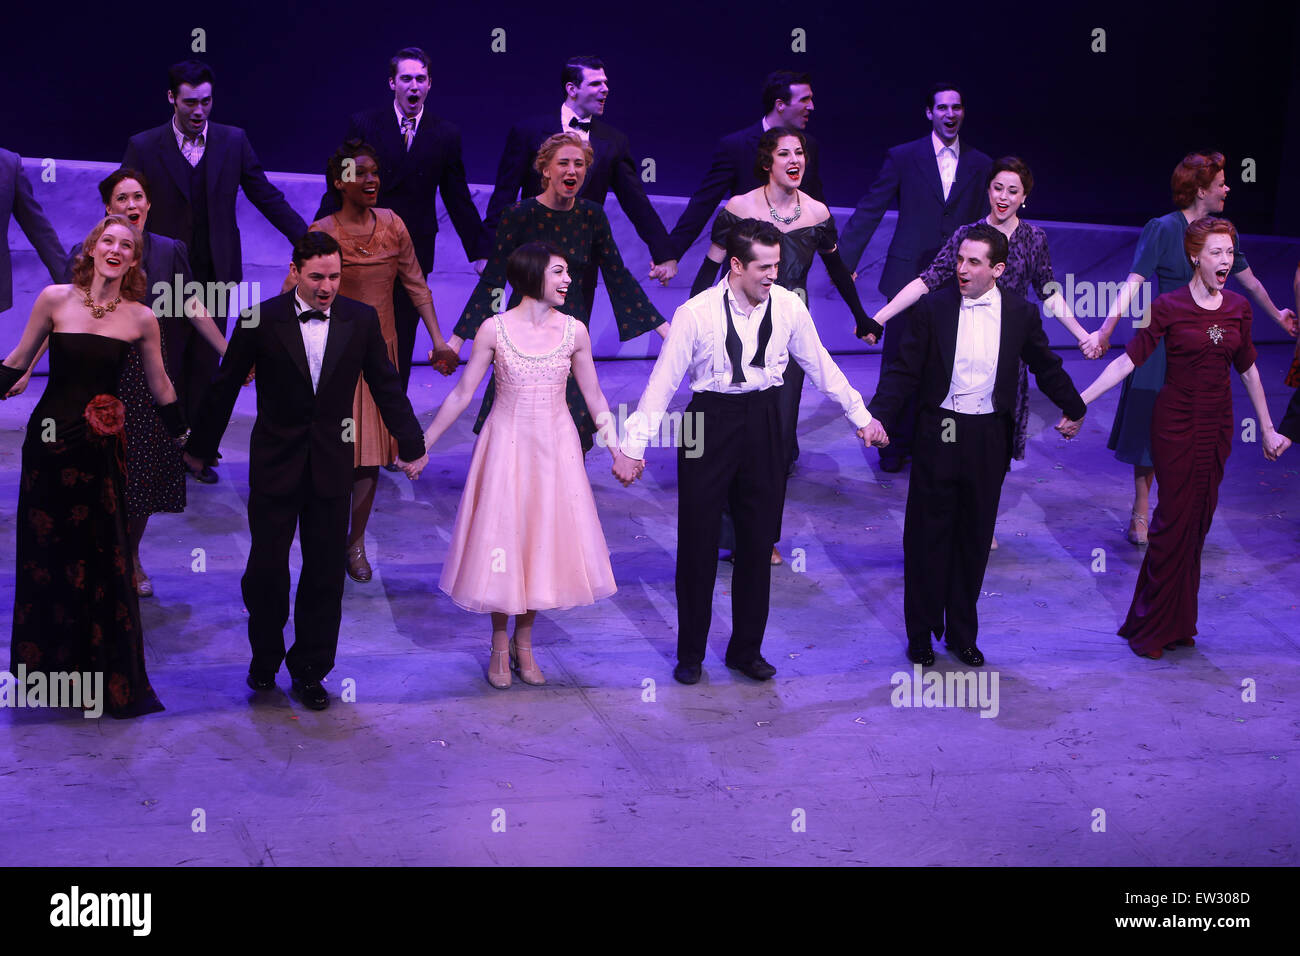 Opening night for An American in Paris at the Palace Theatre - Curtain Call.  Featuring: Jill Paice, Max von Essen, Leanne Cope, Robert Fairchild, Brandon Uranowitz, Veanne Cox, cast Where: New York City, New York, United States When: 12 Apr 2015 C Stock Photo